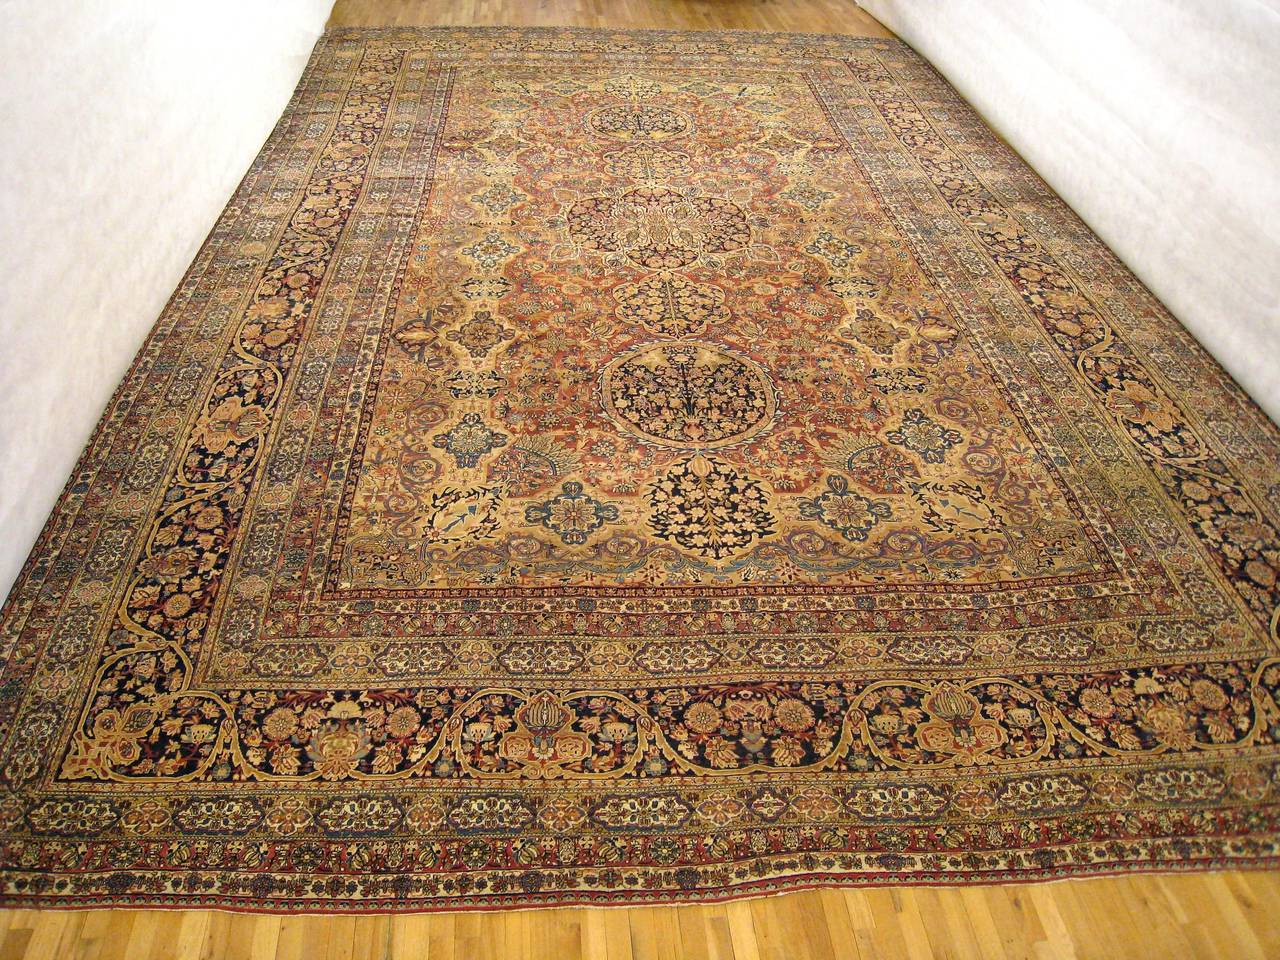 A magnificent oversize antique Persian Lavar carpet, circa 1880. Size: 24'5 x 15'3. This lovely carpet has a series of medallions on an intricately woven soft red central field, with beautiful navy outer border. This rug is extremely finely woven,